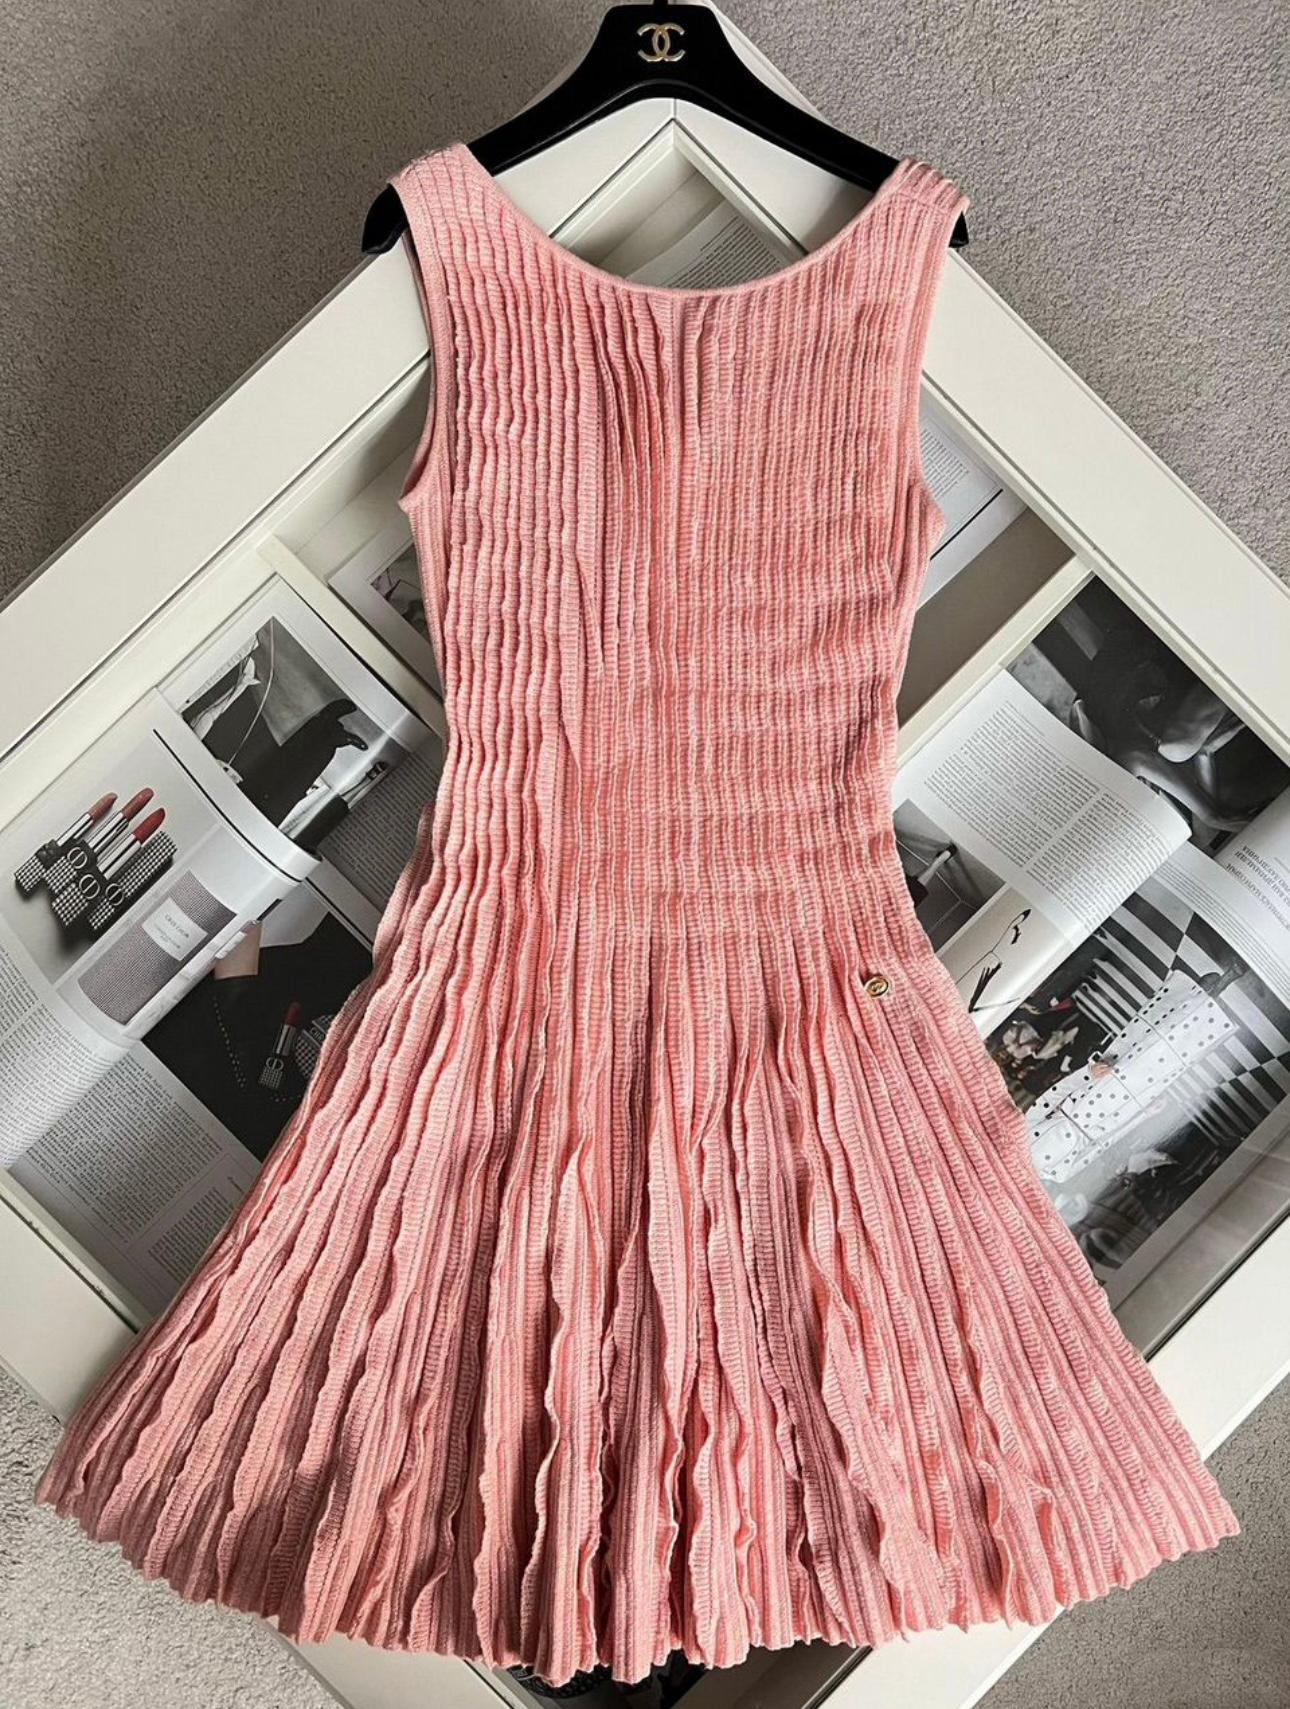 Chanel pastel pink cashmere dress featuring baroque style 'pleats' from Paris / VERSAILLES Cruise Collection.
- CC logo charm at waist.
Size mark 36 FR. Pristine condition.